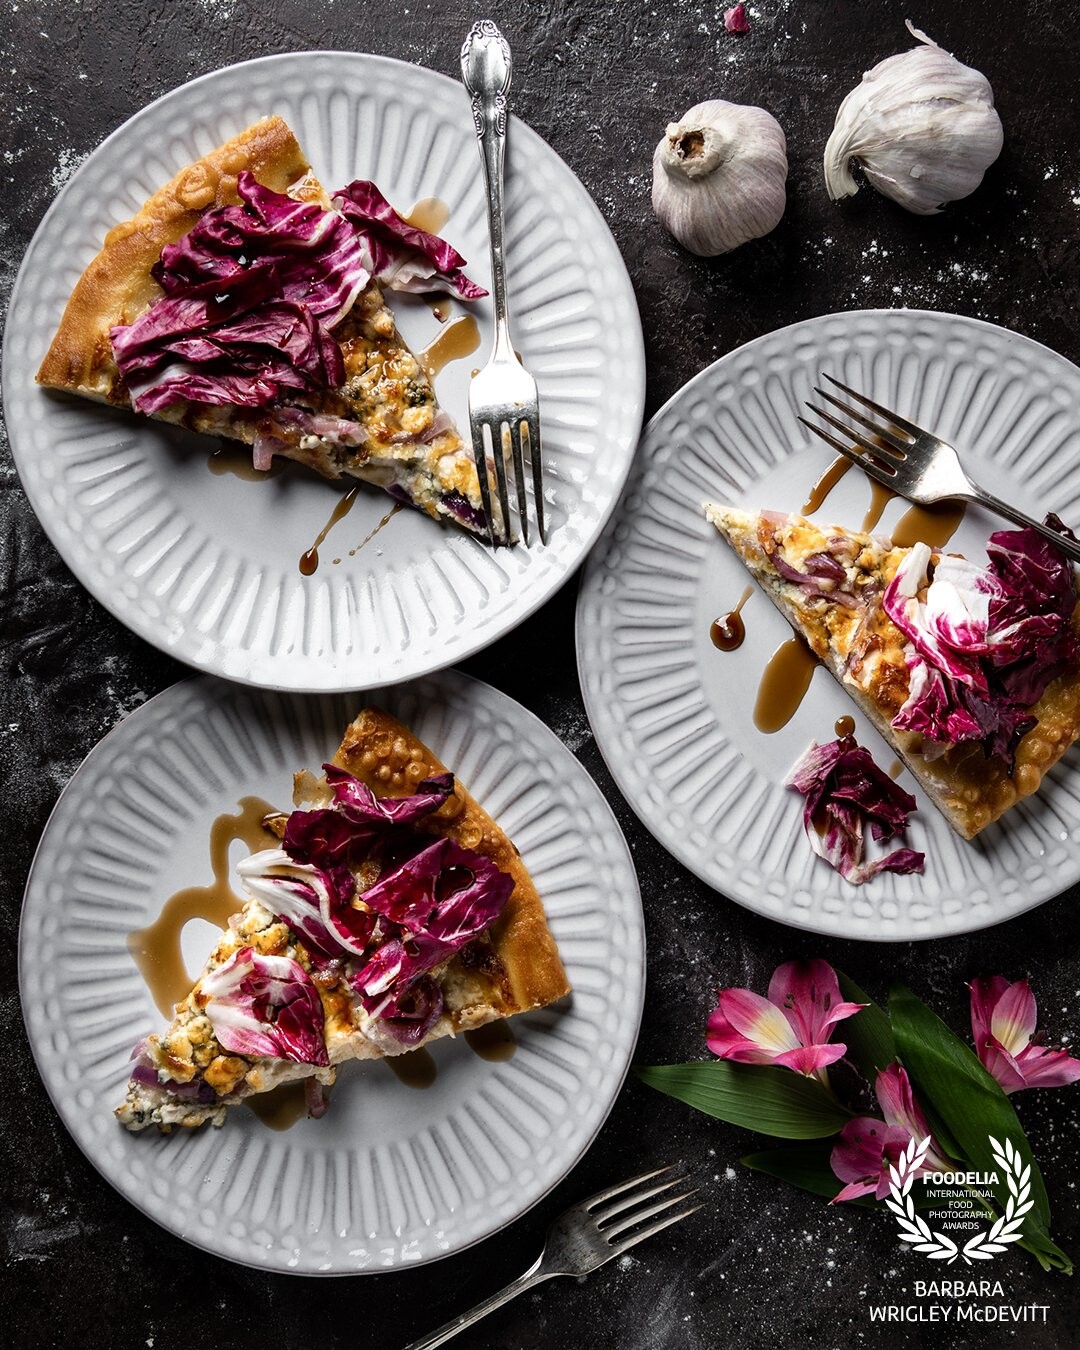 Pizza is definitely one of my favorite foods.  This pizza includes blue cheese and radicchio atop an Alfredo sauce with a balsamic vinegar glaze.  The color of the radicchio visually brings out the best of this pizza.  Anyone care for a slice?<br />
<br />
Shot with the Nikon D850 and 24-70 mm lens.  Indirect lighting with a Profoto B-1 pointed into a 36 inch white parabolic umbrella.